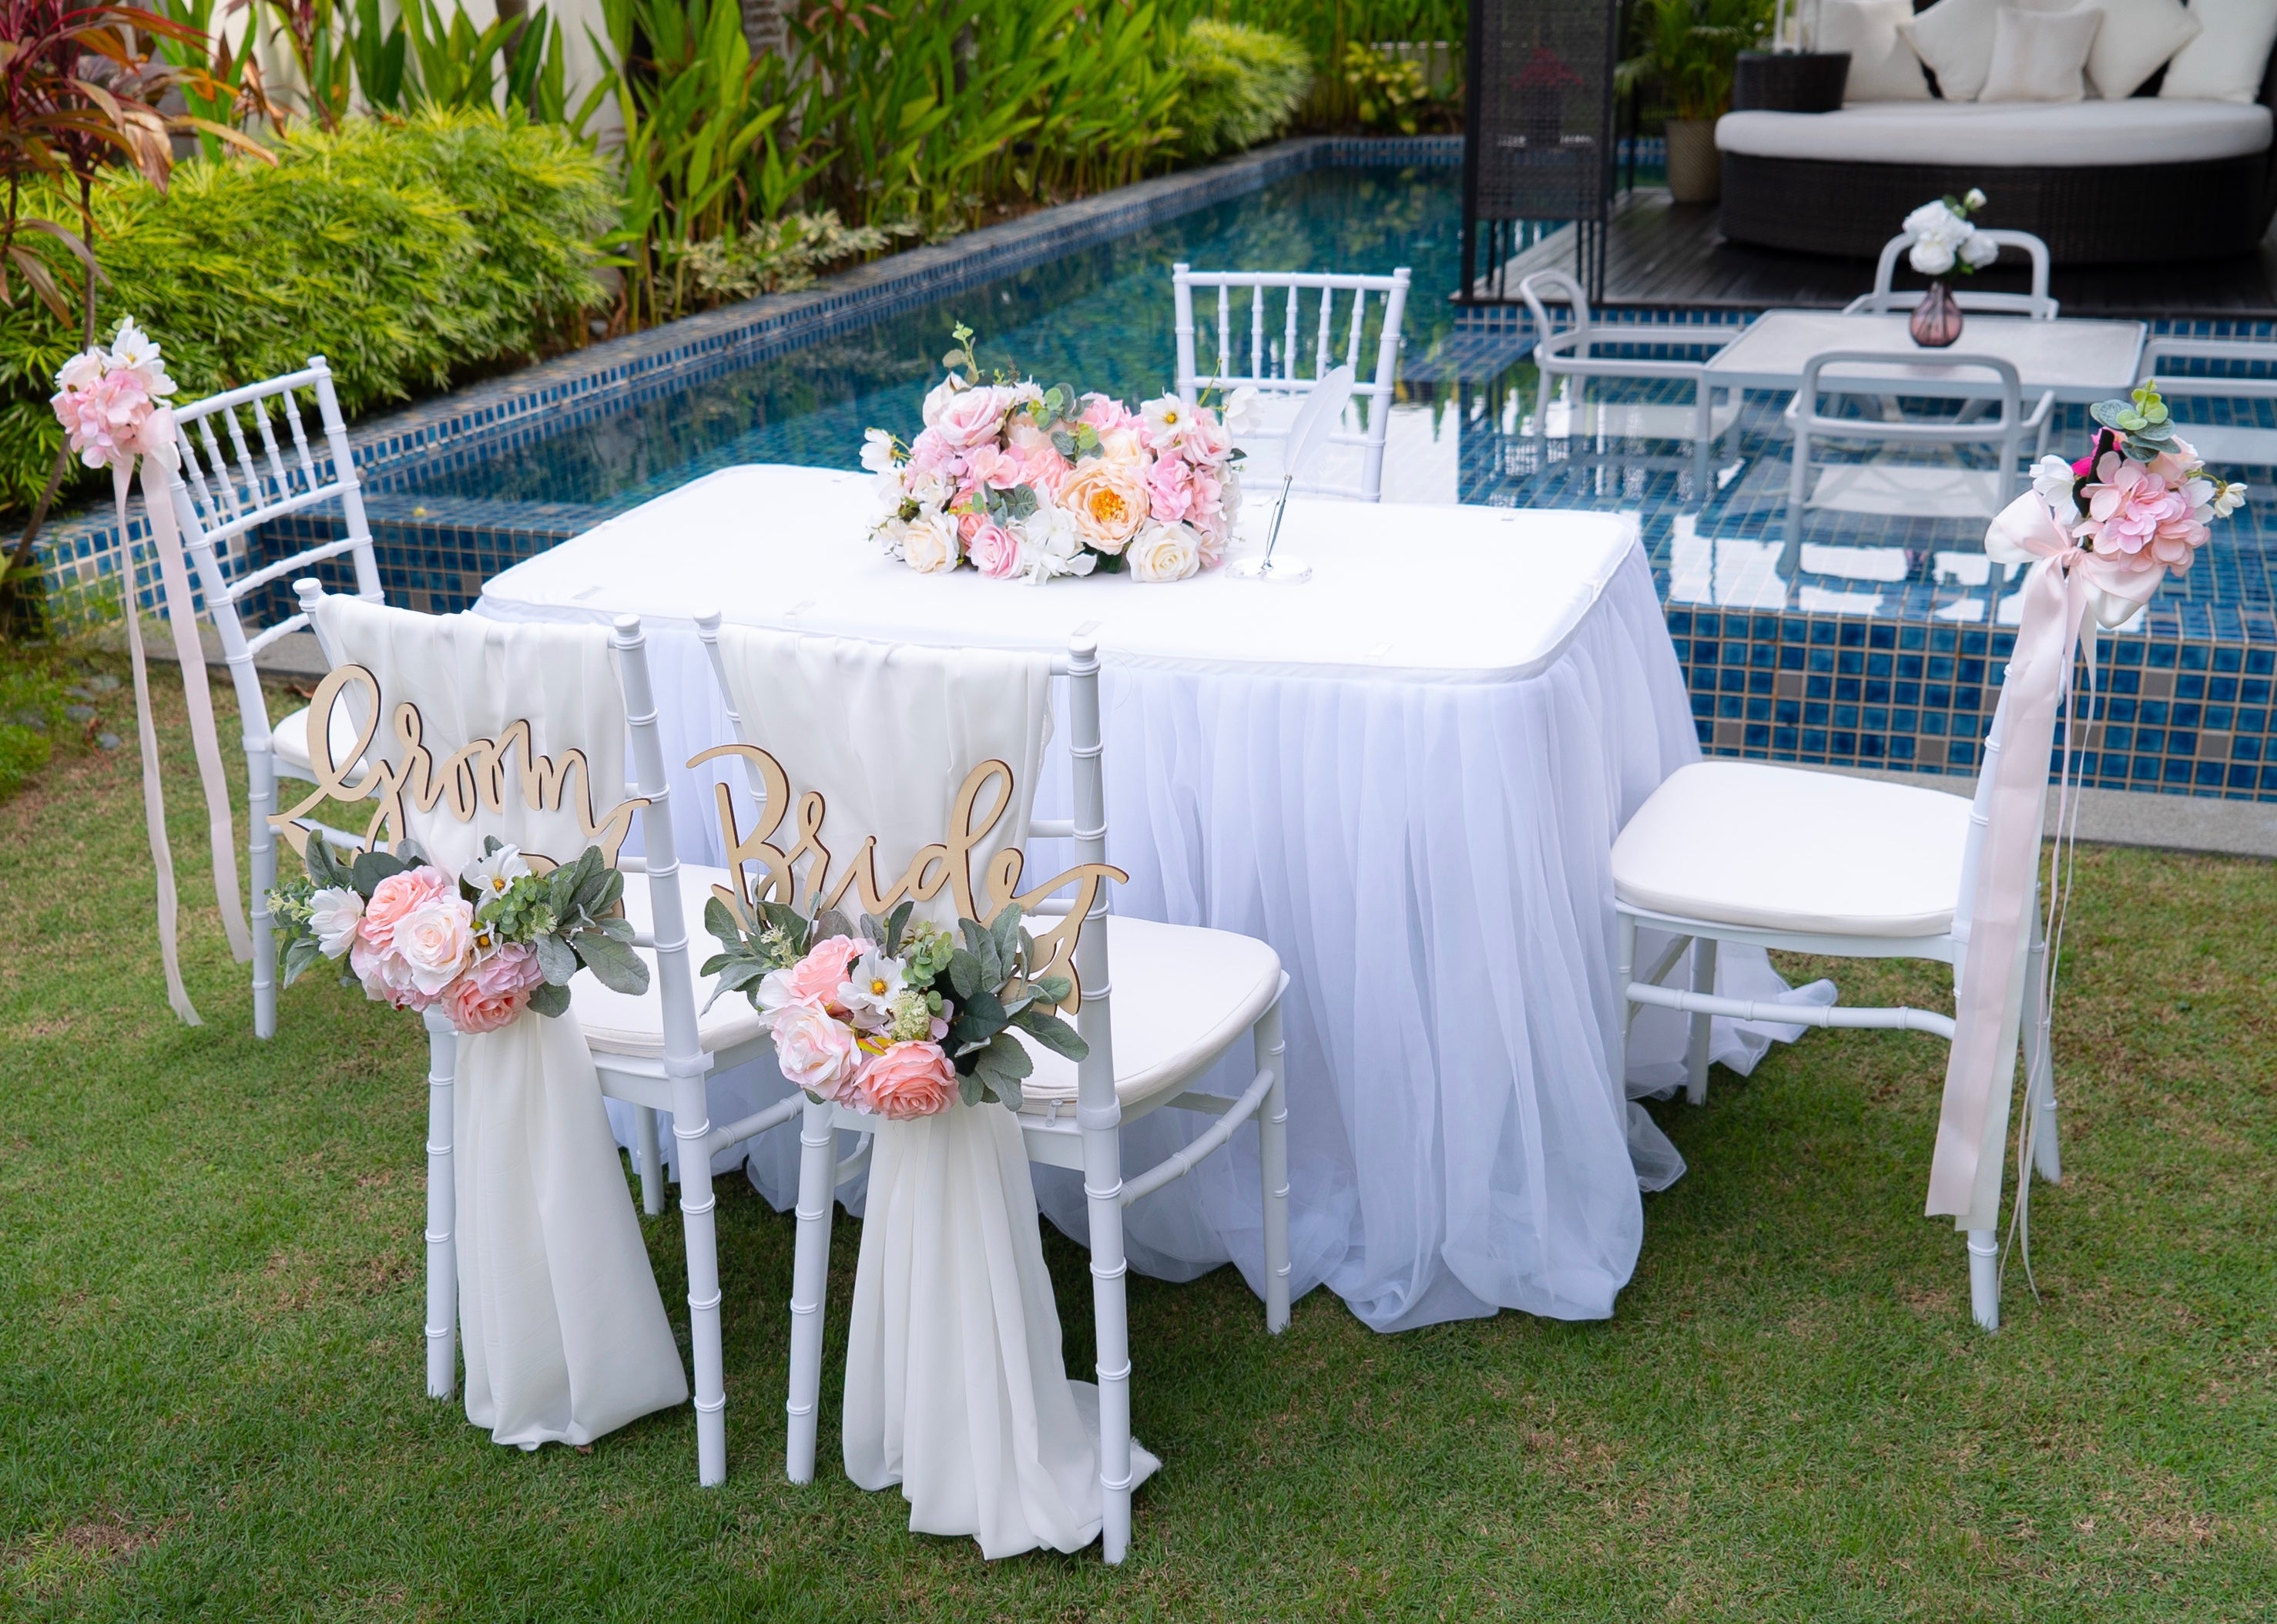 Sweet and Simple Outdoor Solemnisation/ROM Decor in Singapore - Pink & White Theme Table only